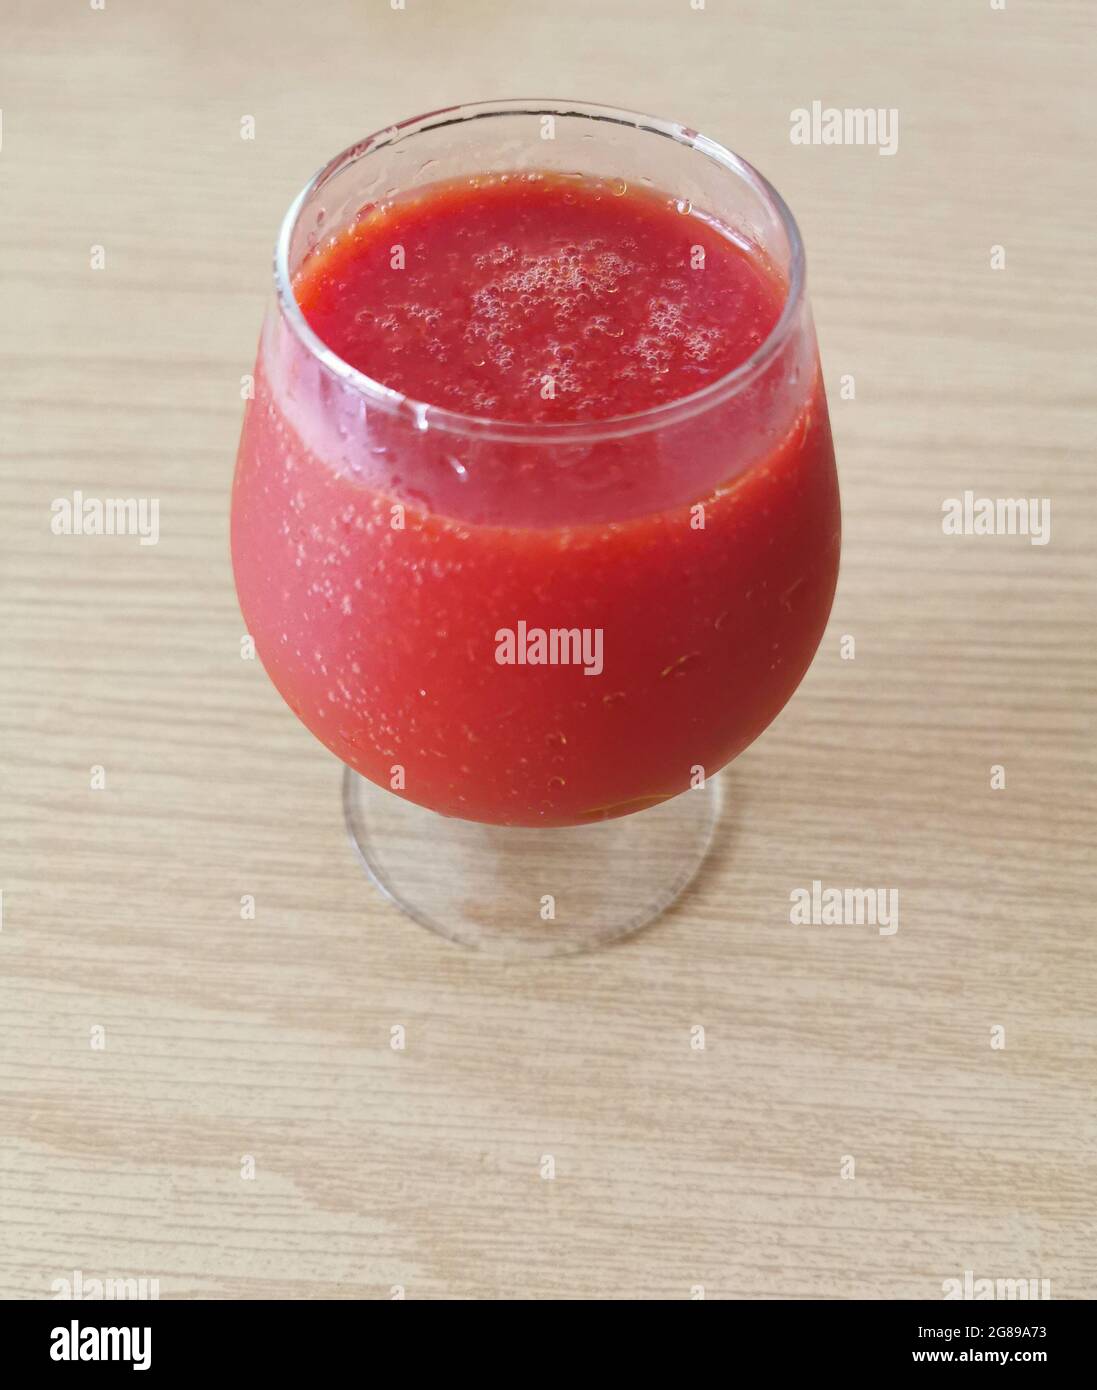 A glass of fresh cold tomato juice Stock Photo